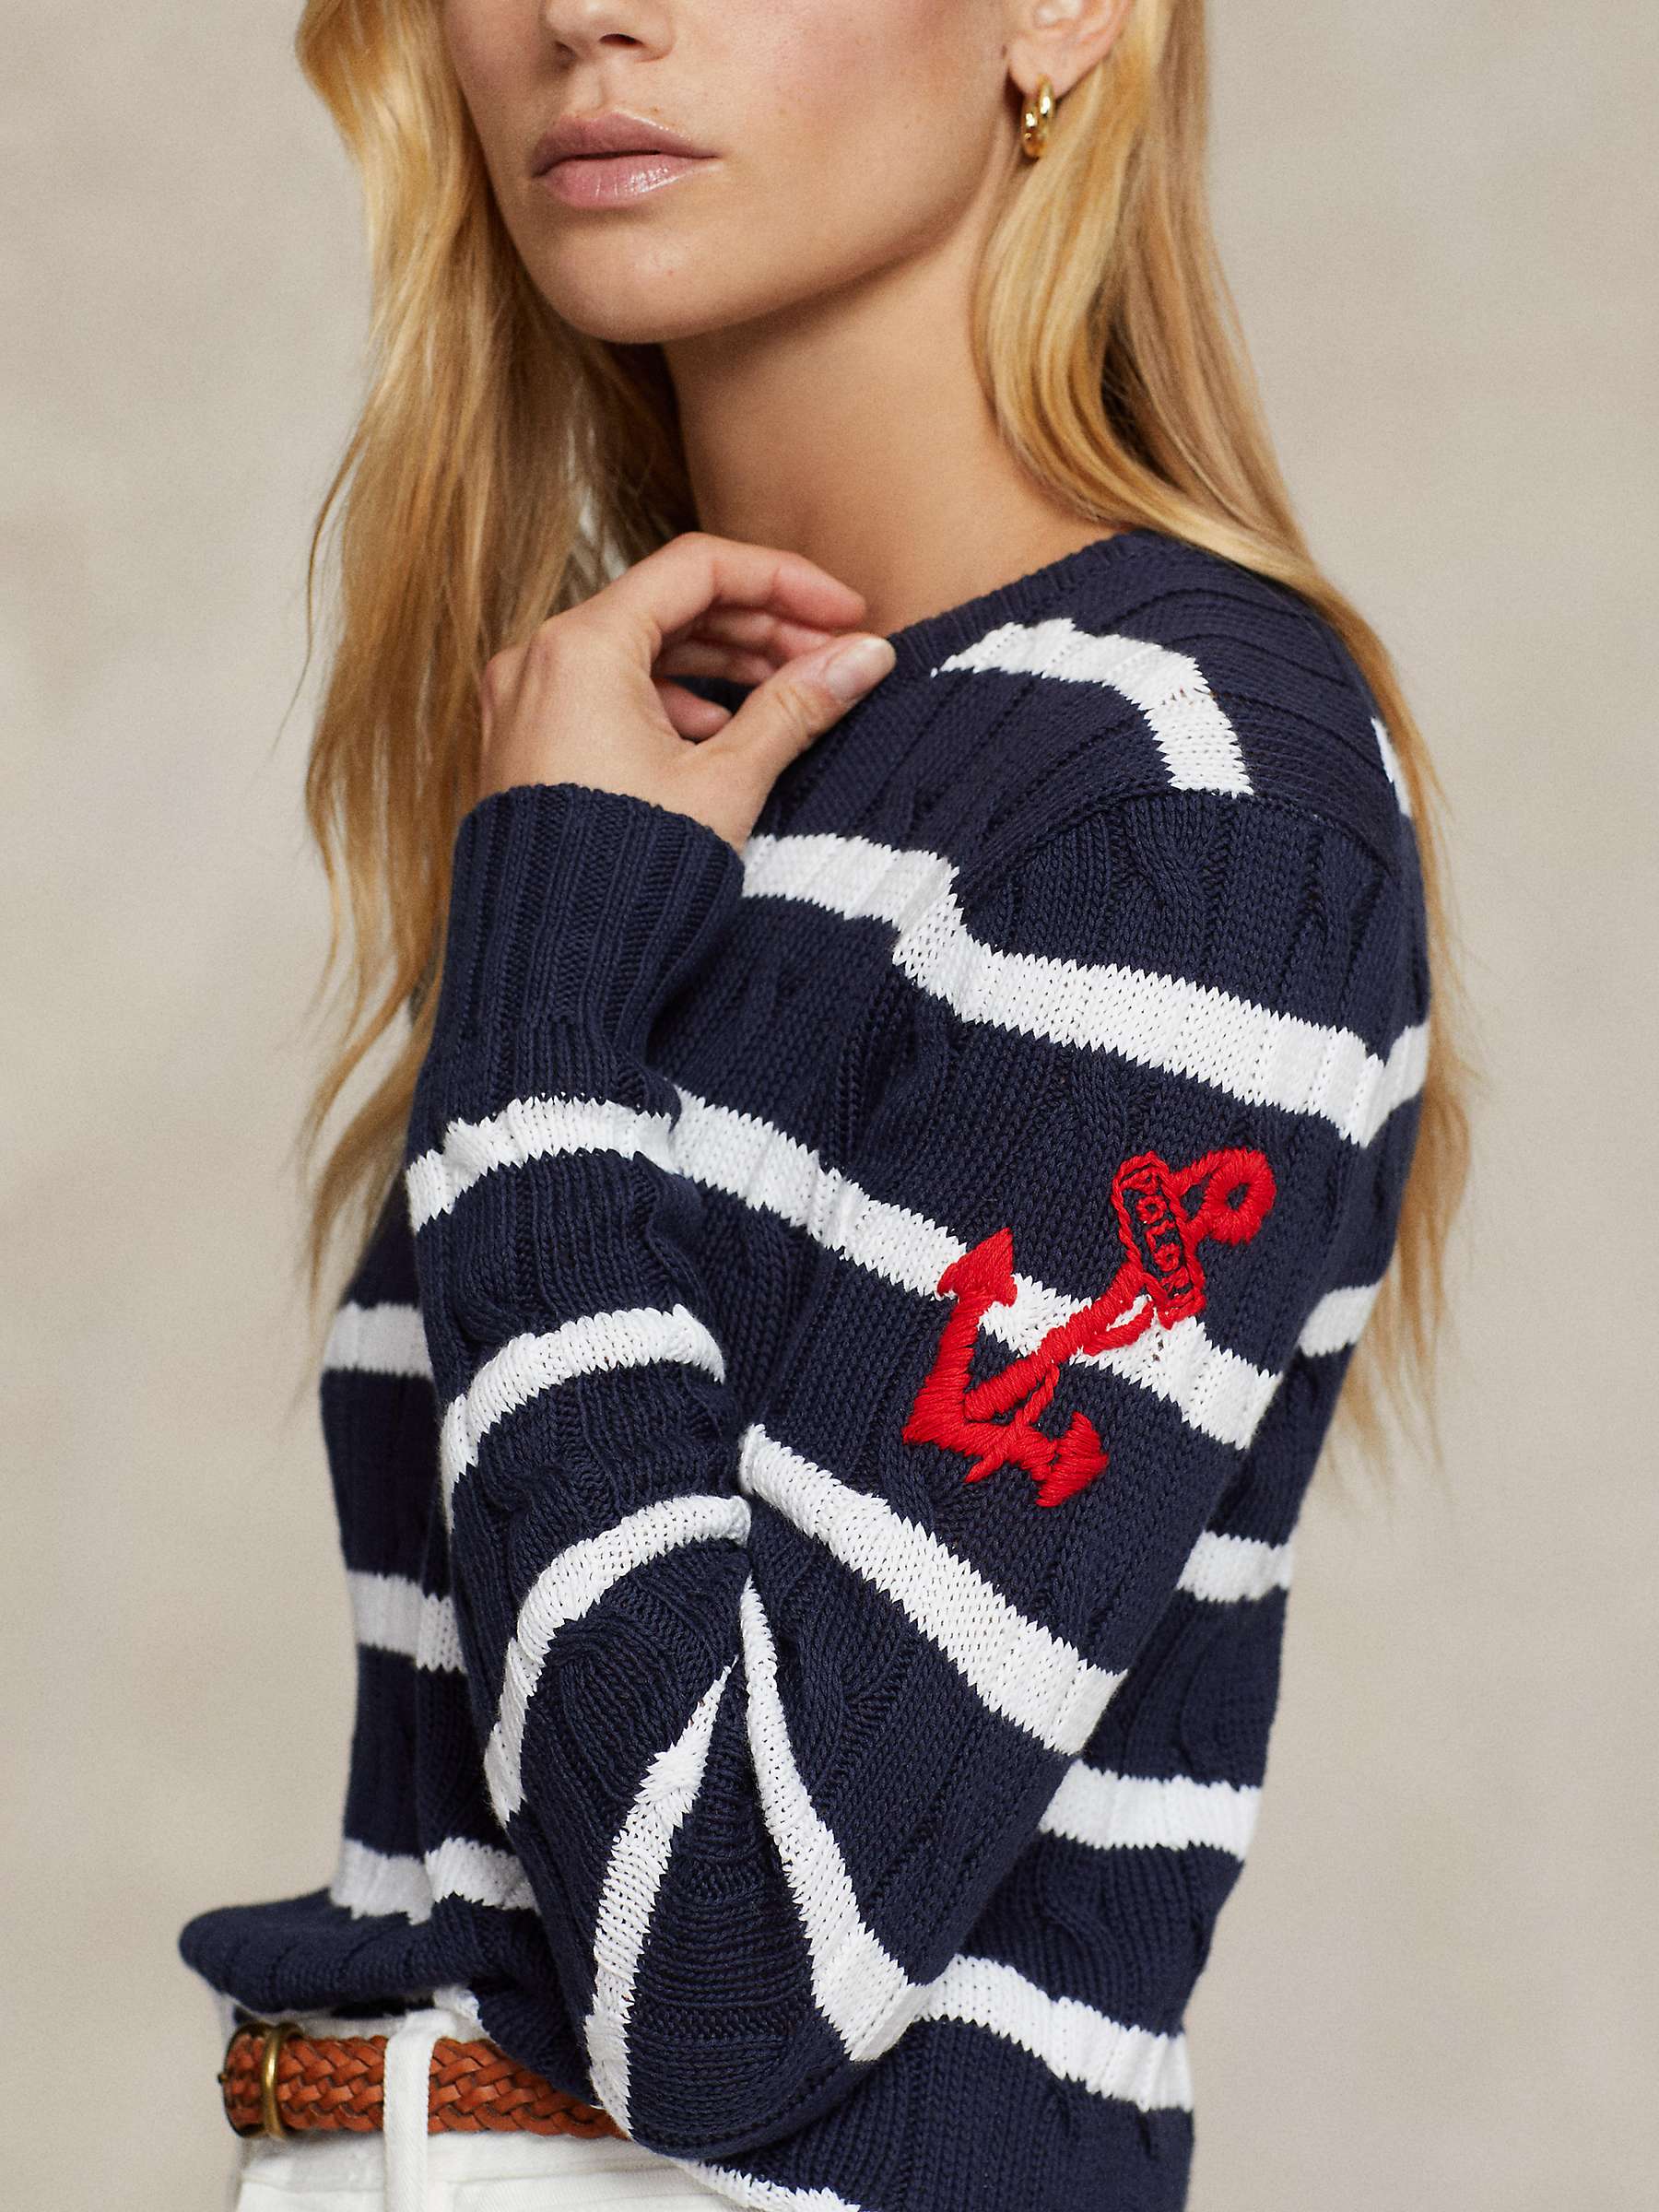 Buy Polo Ralph Lauren Stripe Anchor Embroidered Cable Knit Jumper, Navy/Multi Online at johnlewis.com